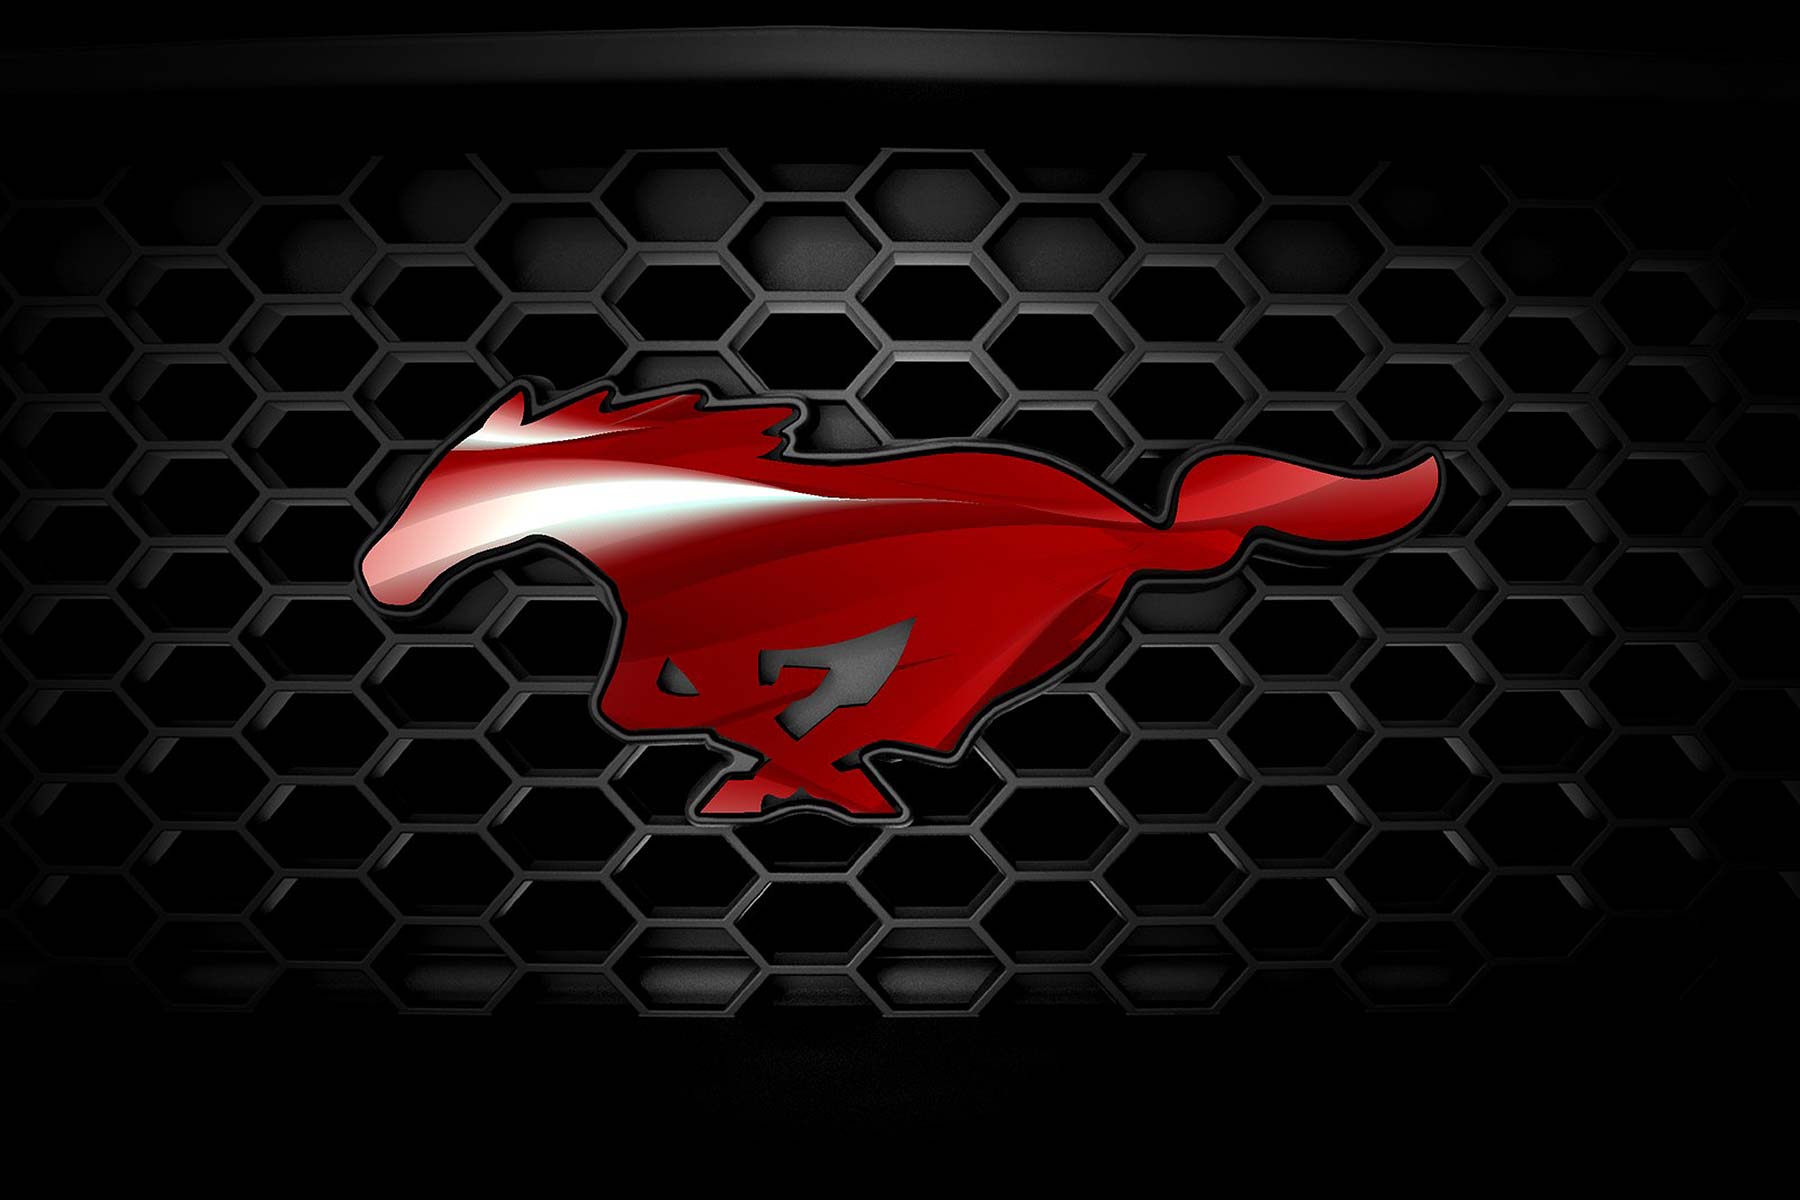 Ford Mustang Logo - Ford unveils Mustang badge customizer | Motoring Research